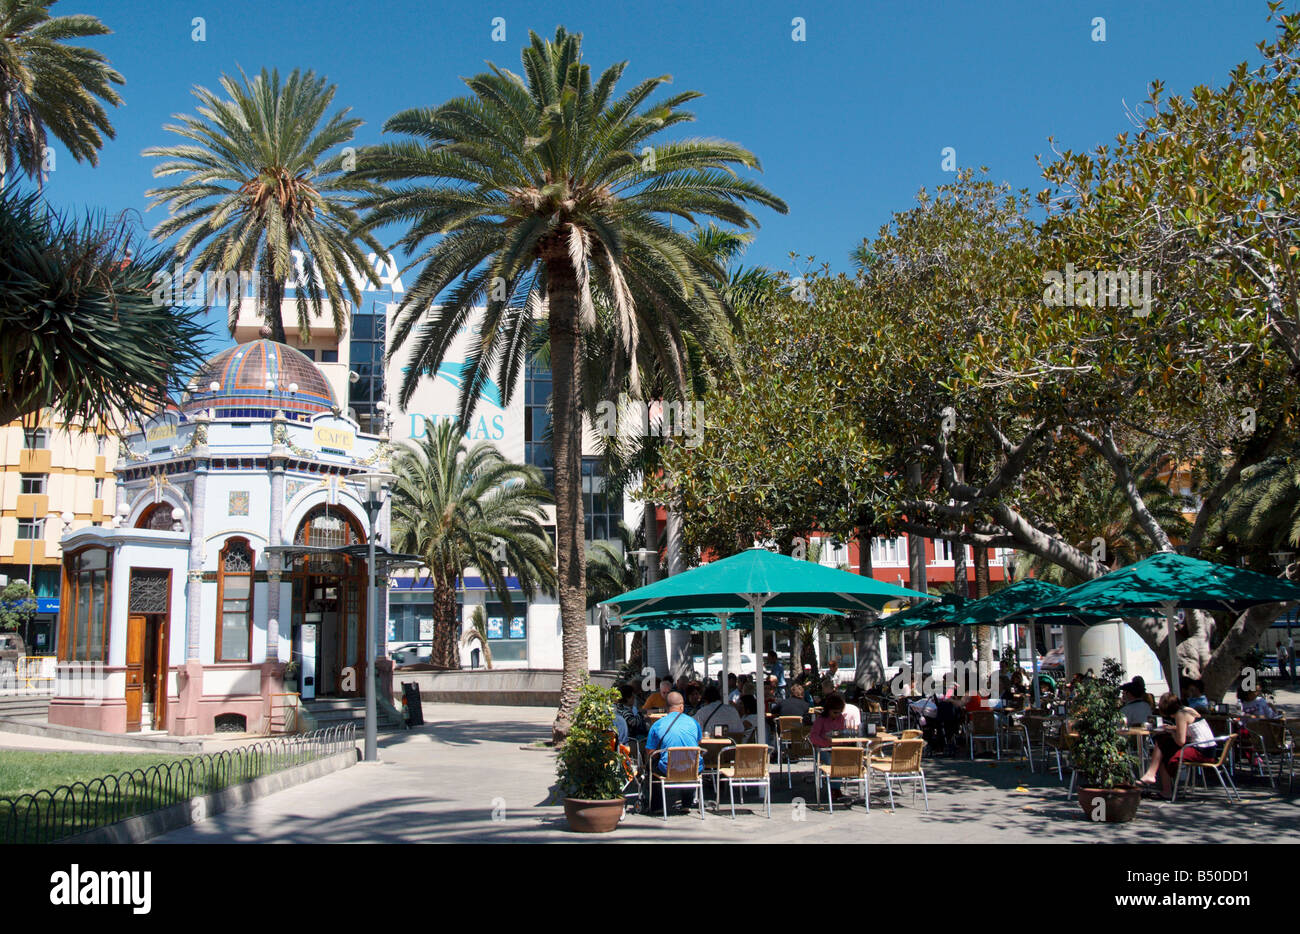 Cafe in Parque San telmo in Las Palmas on Gran Canaria in The Canary Islands  Stock Photo - Alamy